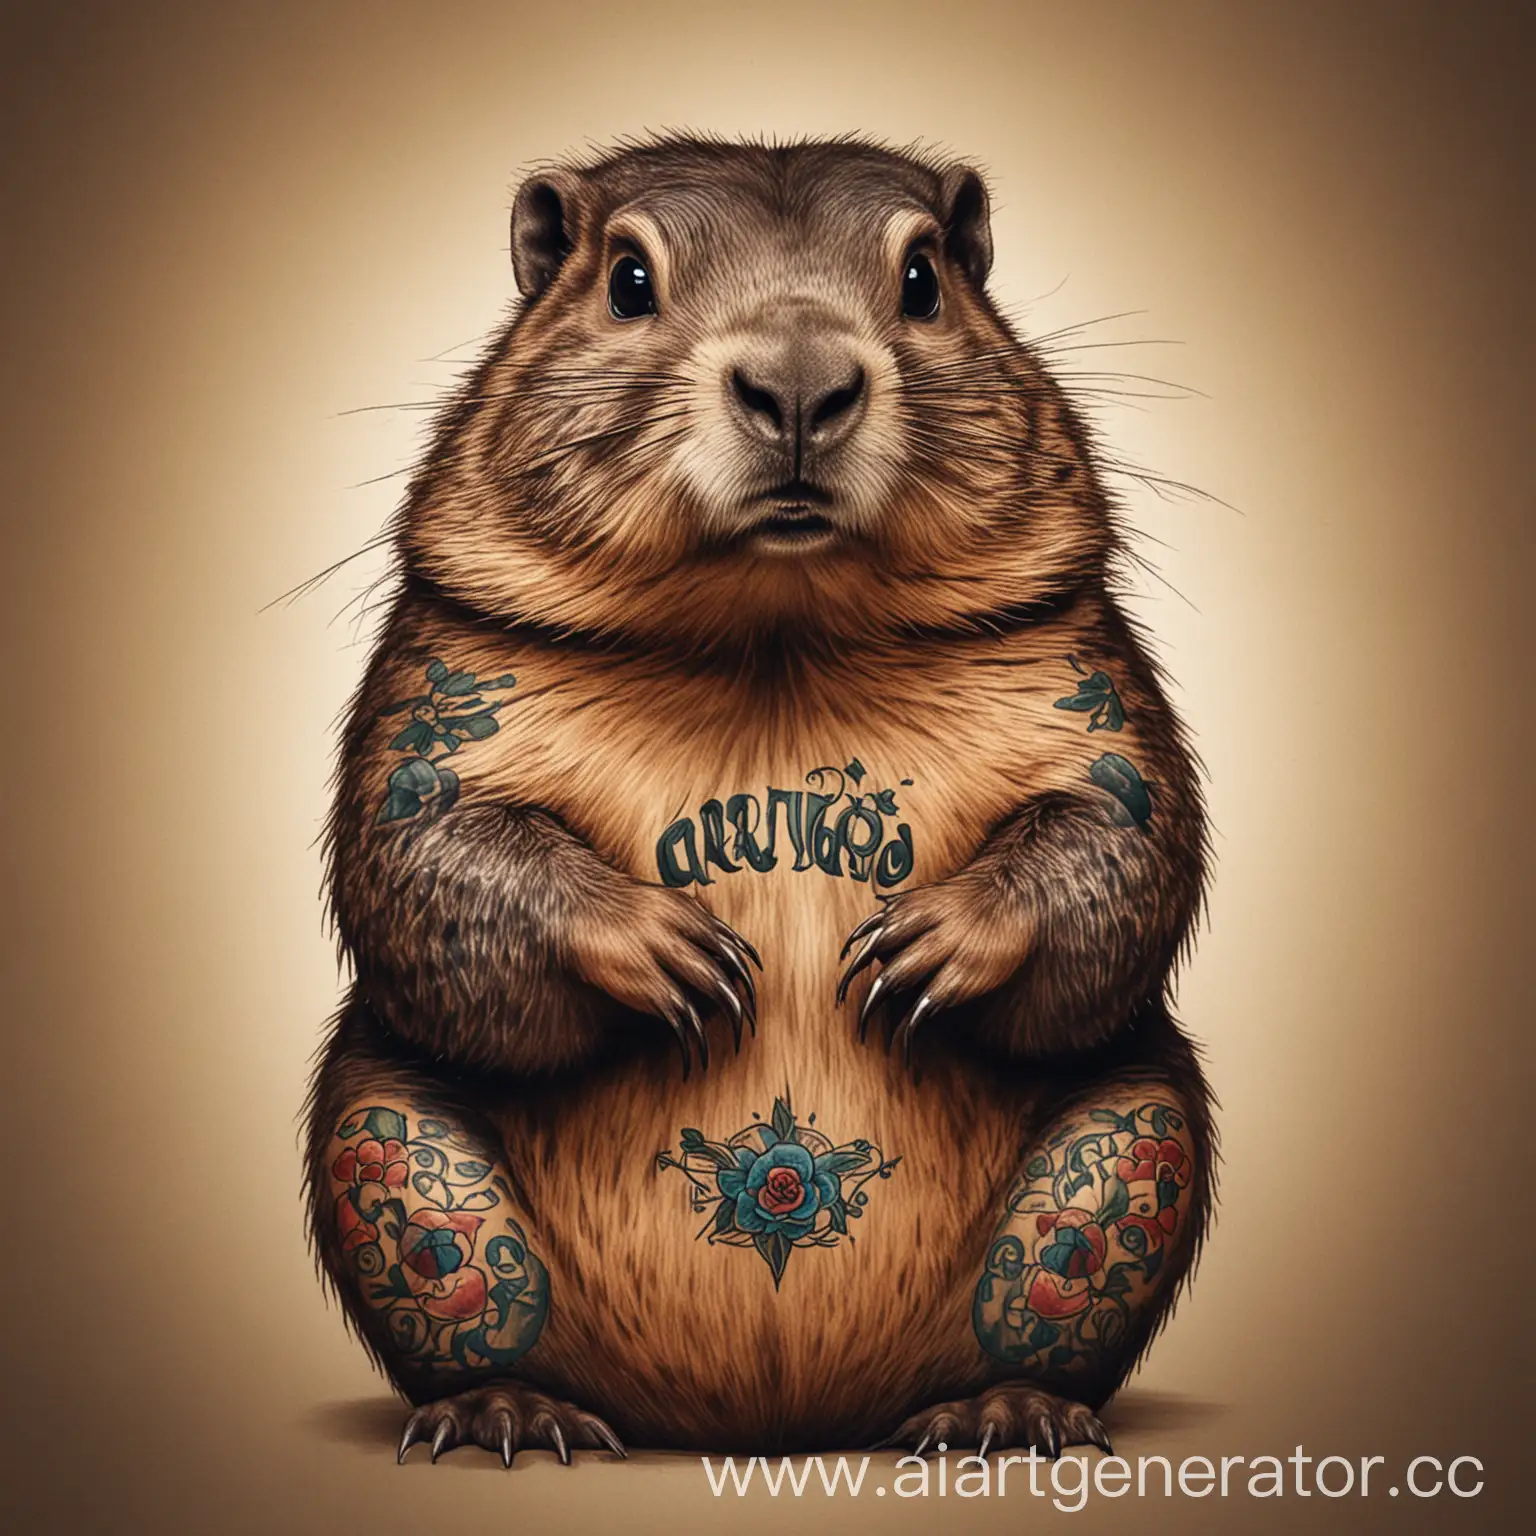 Edgy-Groundhog-with-Tattoos